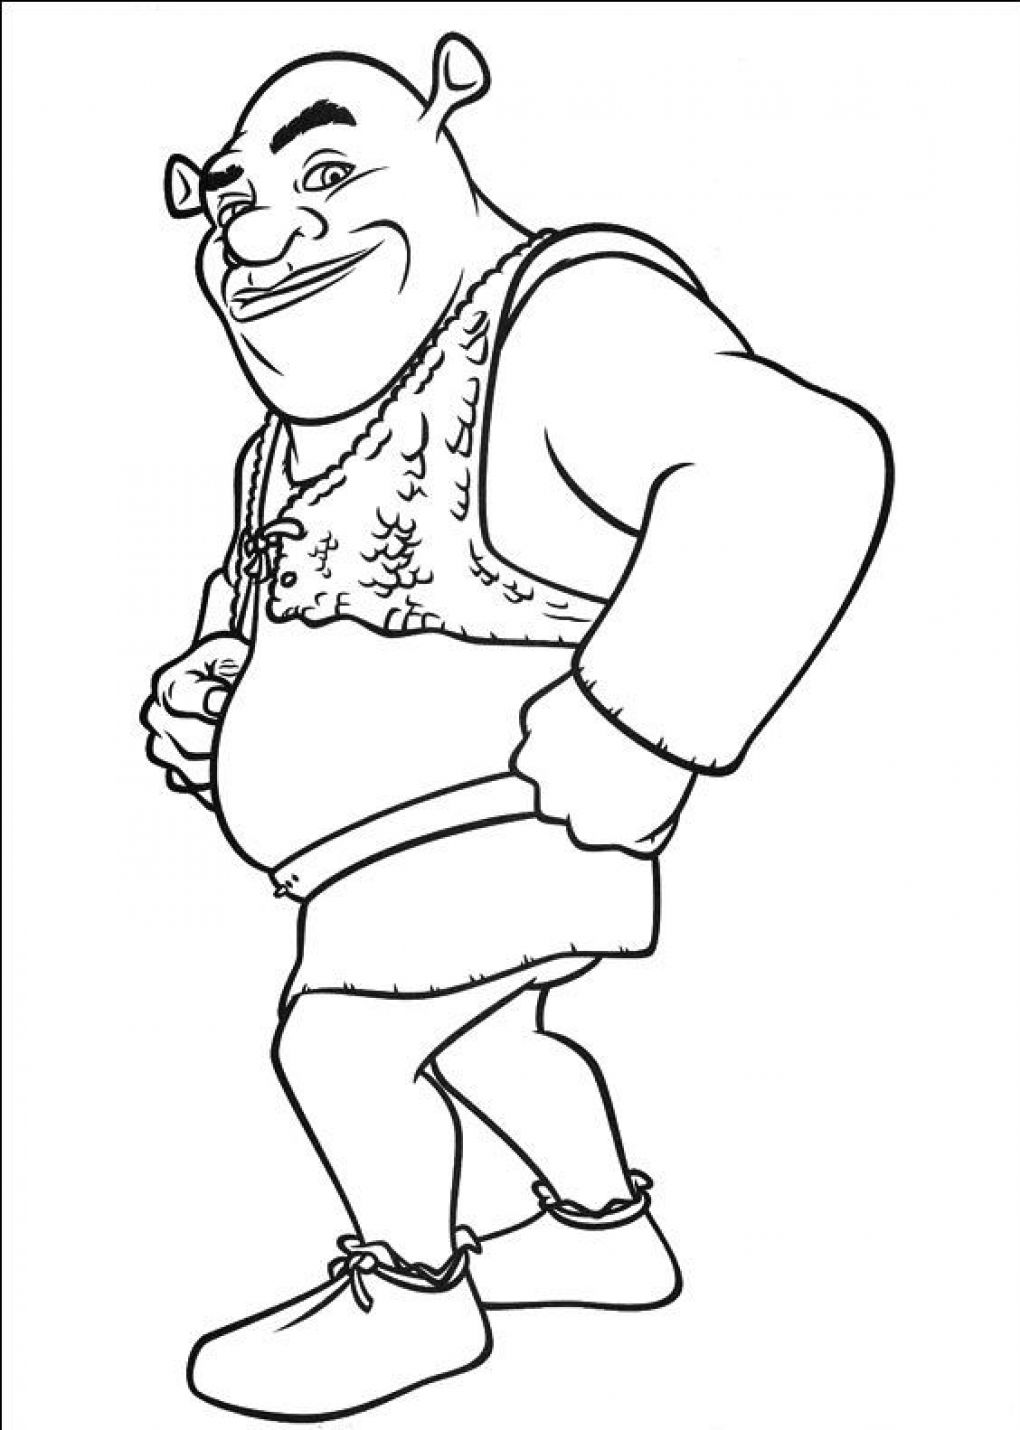 33-diy-shrek-costume-birthday-party-ideas-and-shrek-coloring-pages